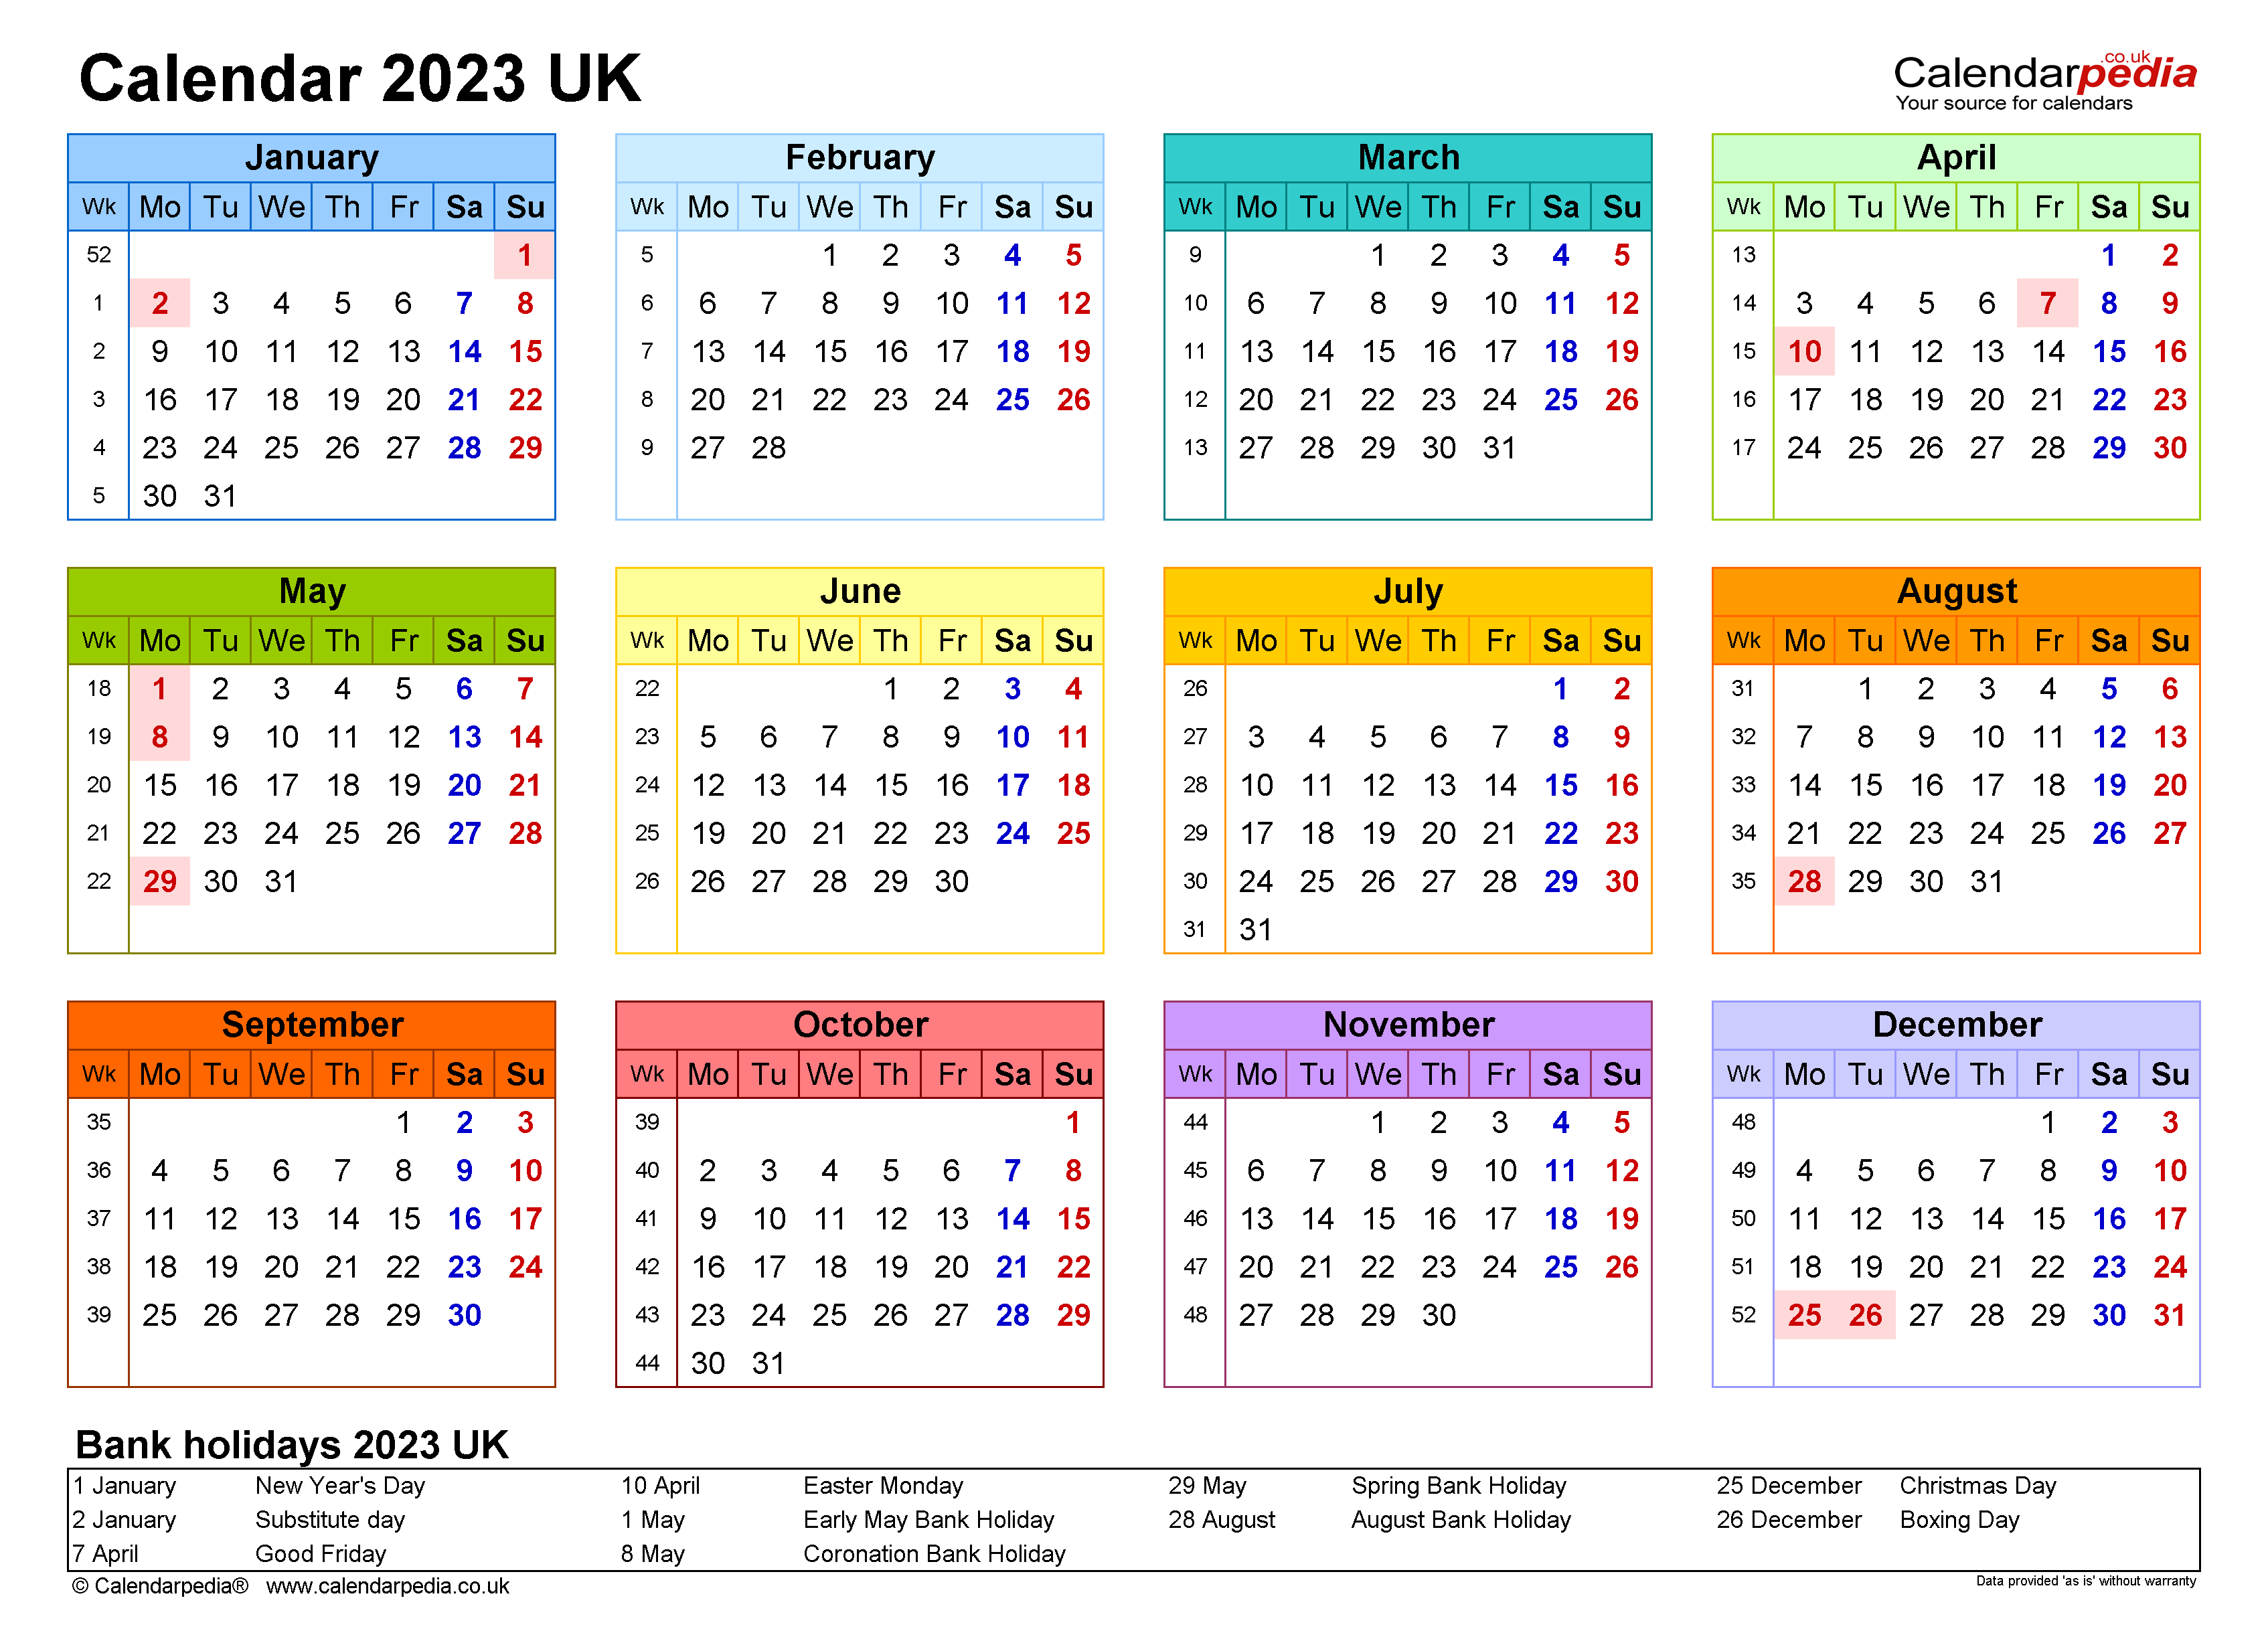 Review Of 2023 Calendar With Week Numbers Images Calendar With